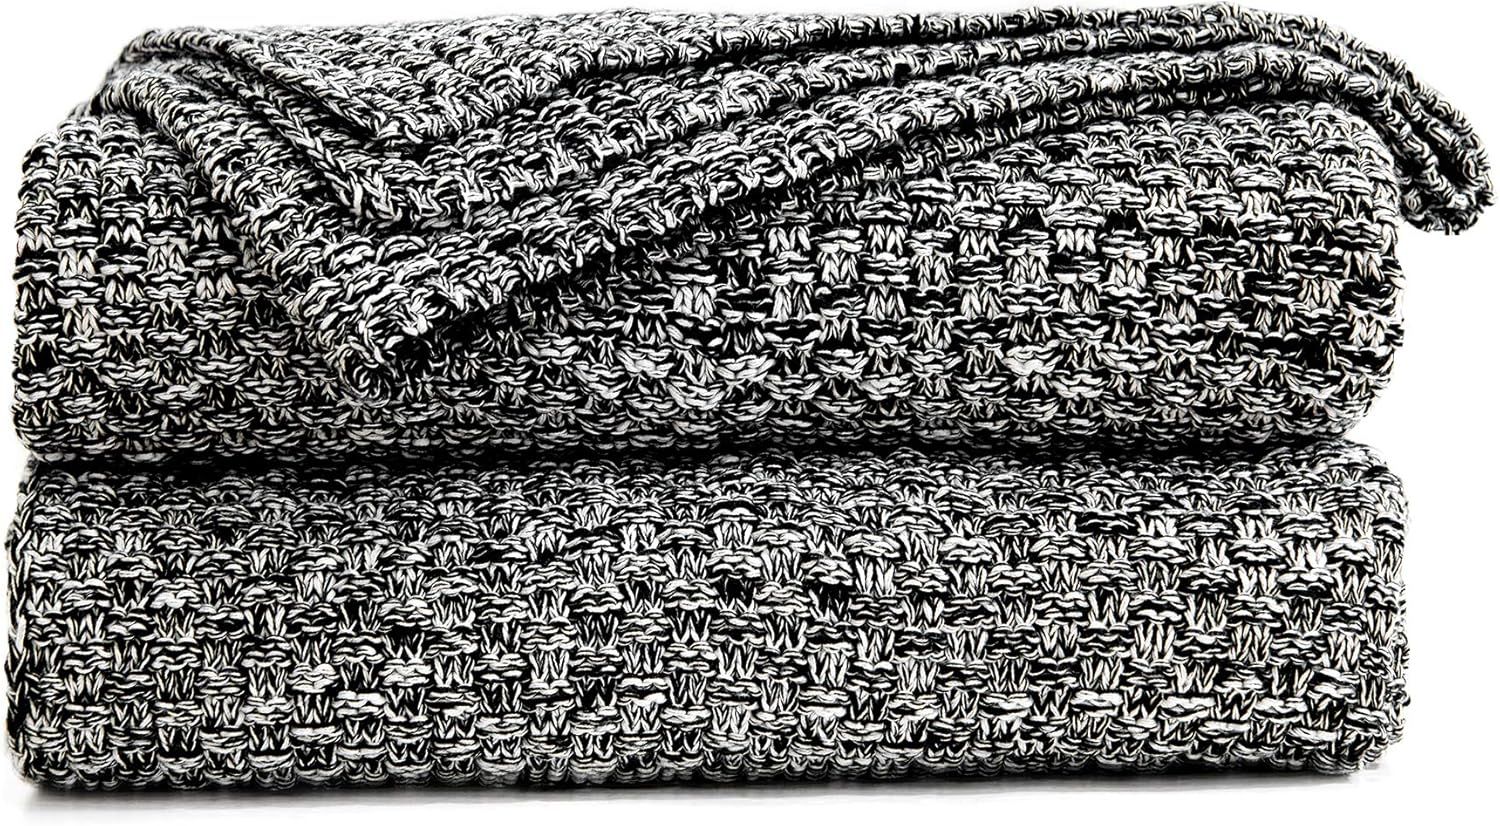 Longhui bedding Black Knitted Throw Blanket for Couch, Soft, Cozy Machine Washable 100% Cotton So... | Amazon (US)